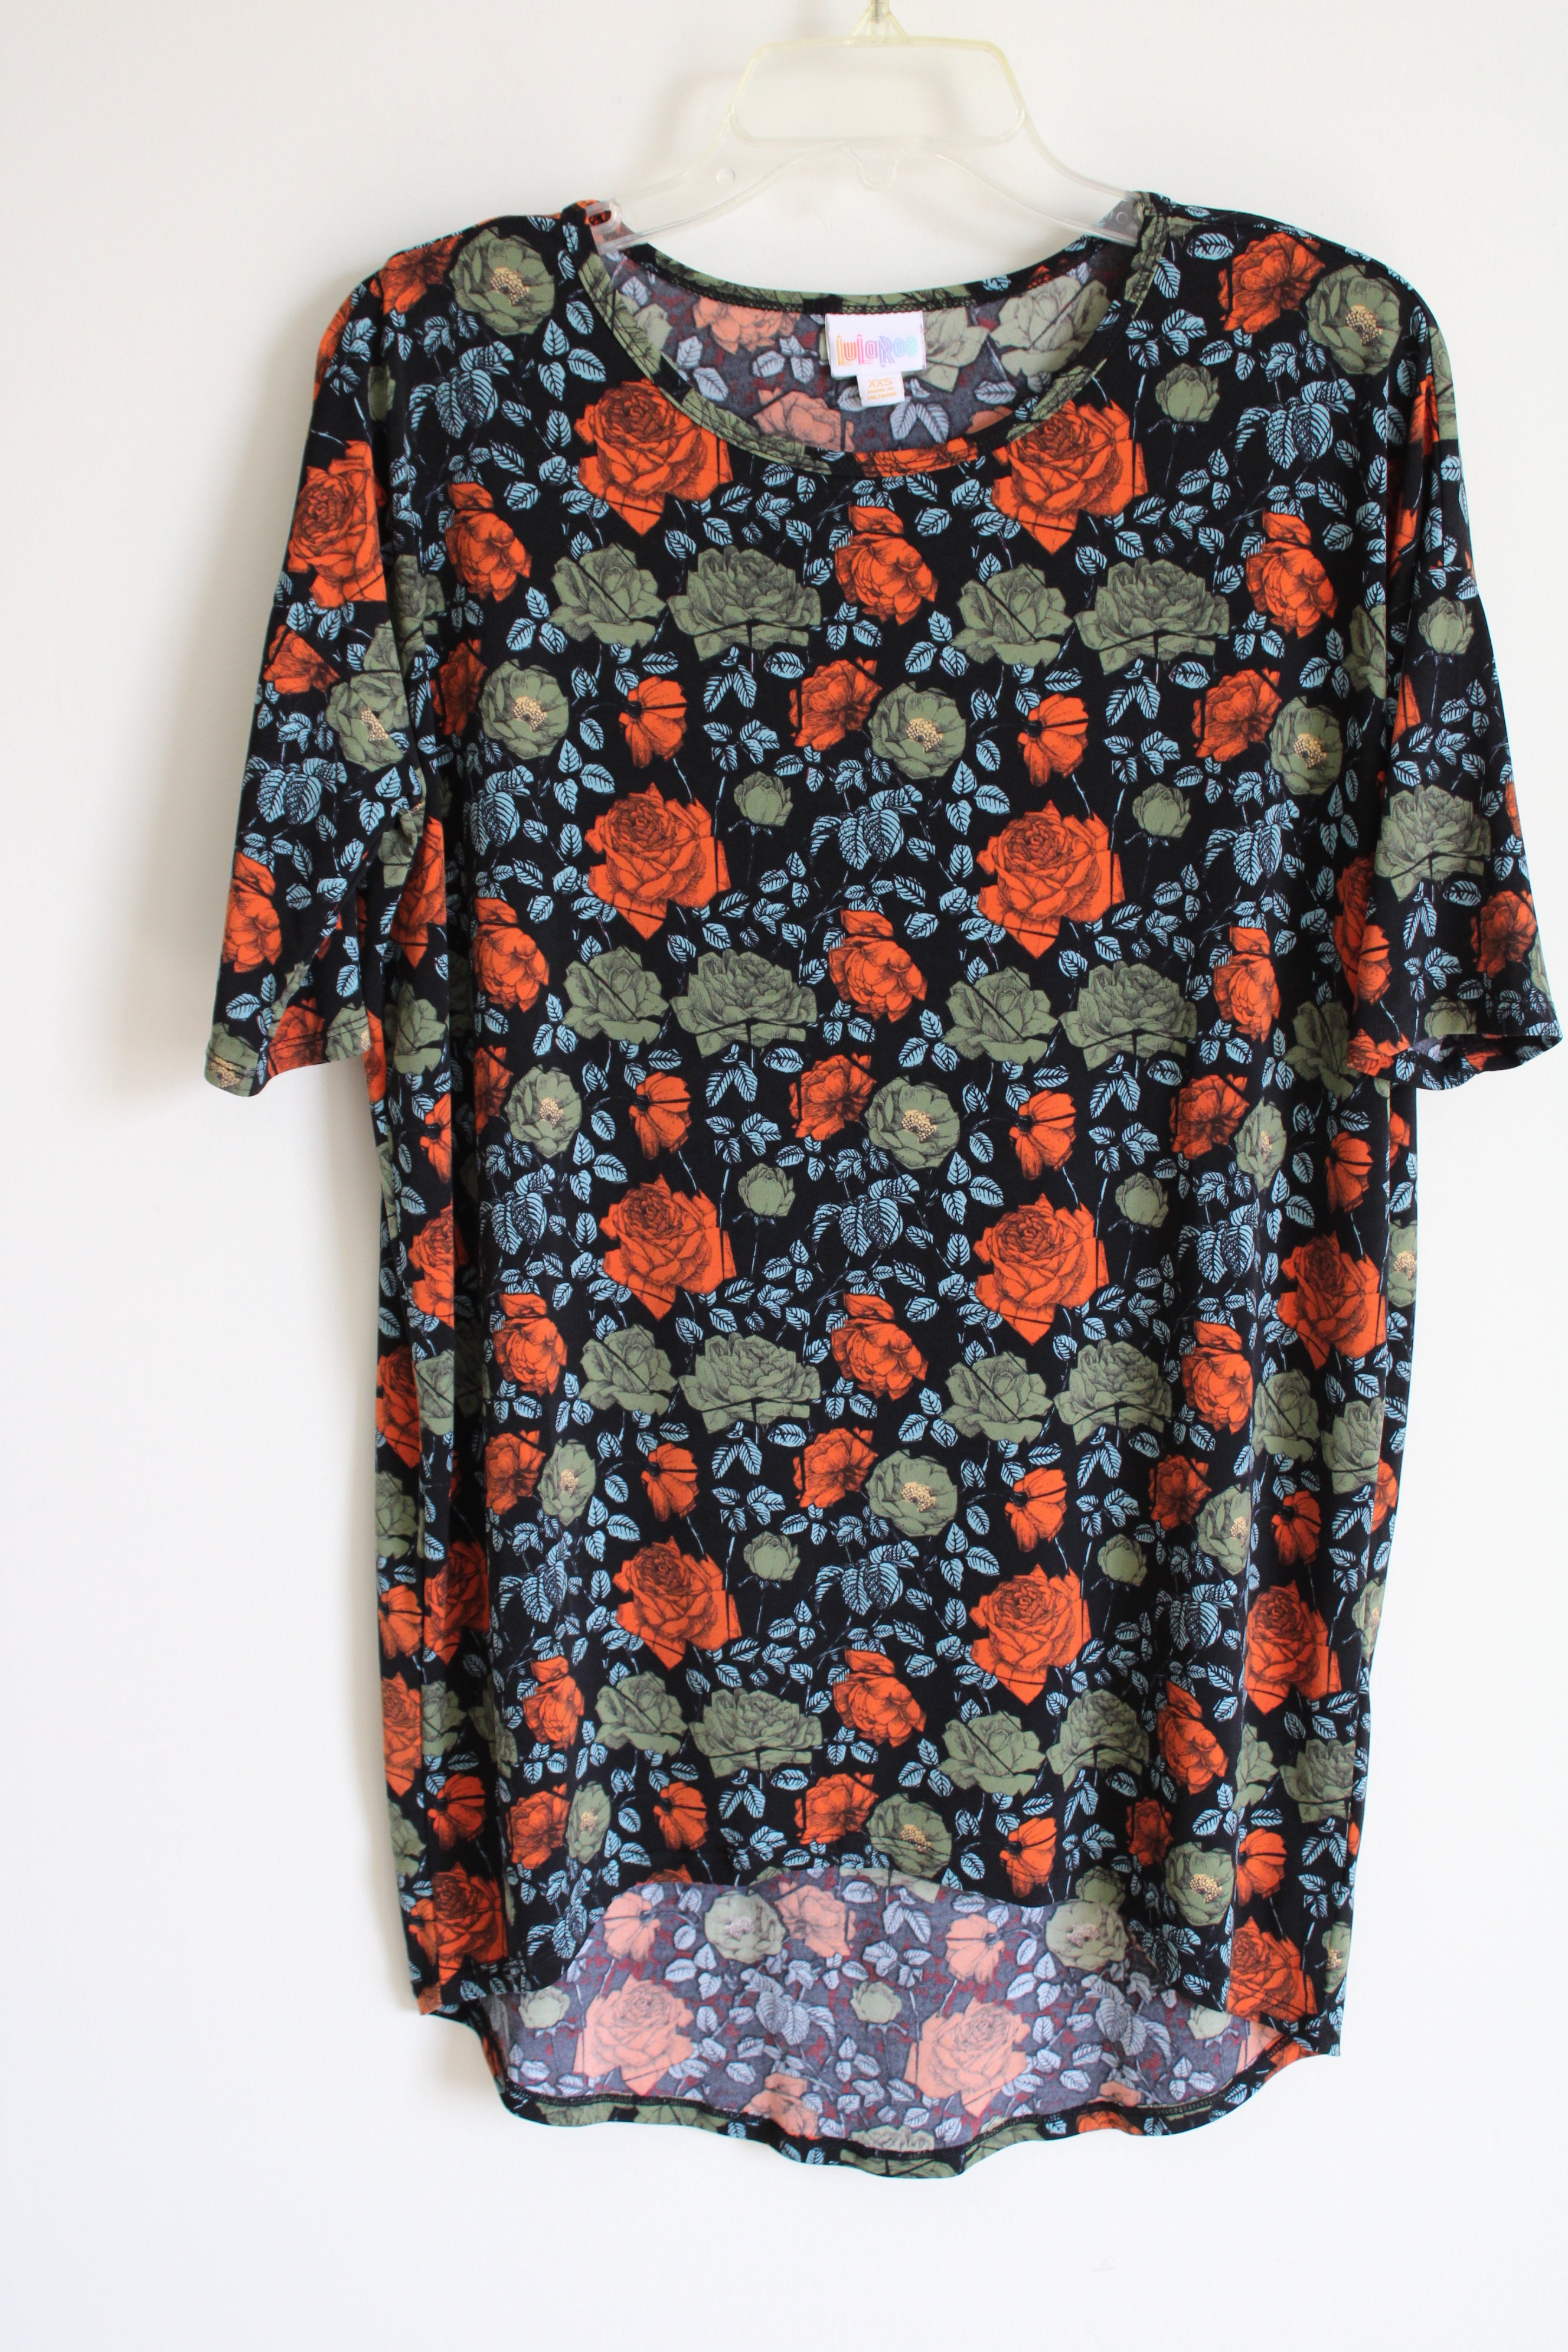 Buying and Selling Thrifted LuLaRoe